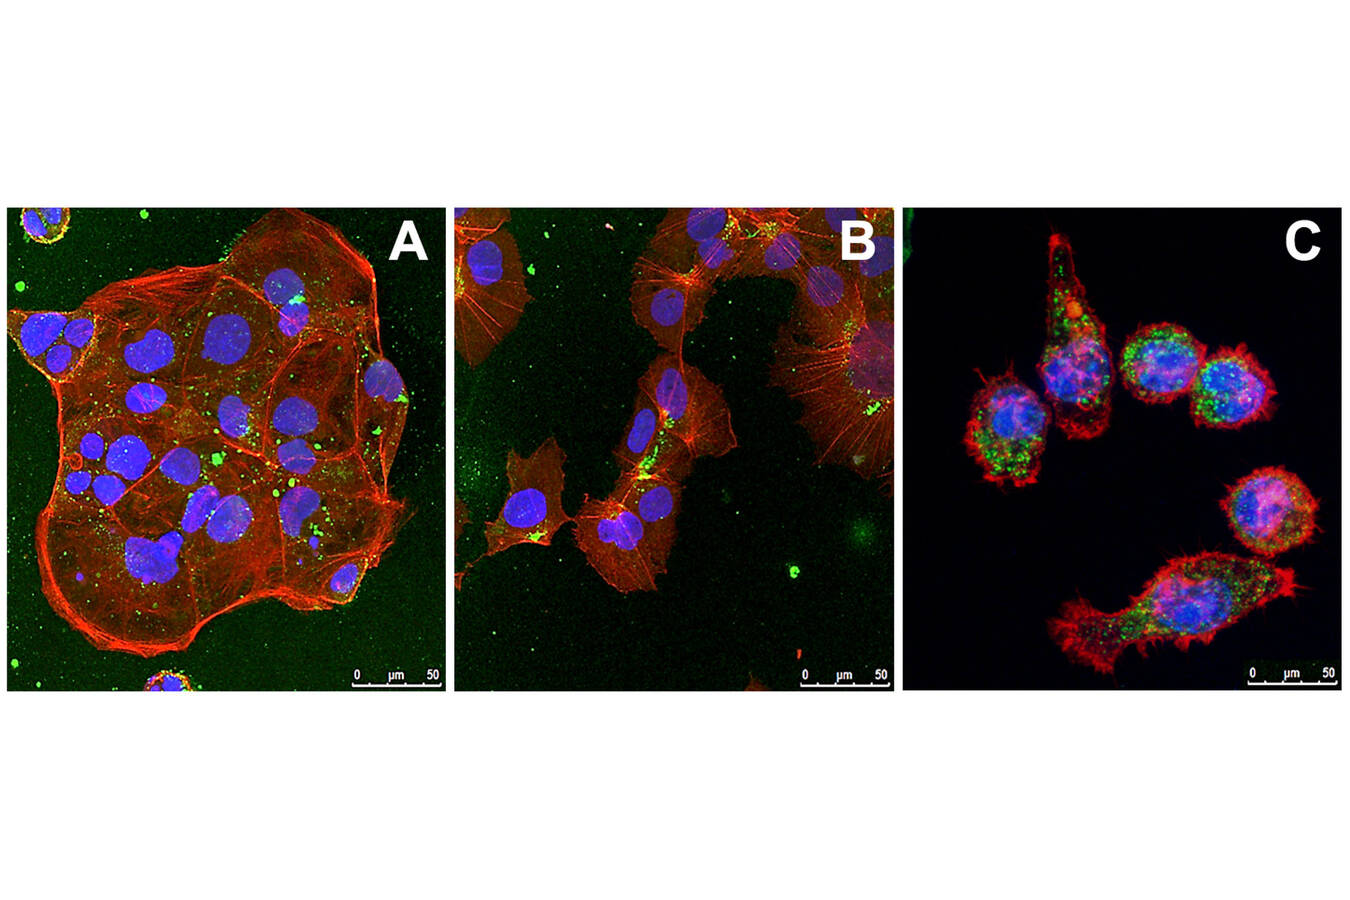 The uptake of particles in (A) Caco2, (B) HepG2 and (C) J774A.1 macrophages cells observed using confocal microscopy; green dots = particles, blue = nuclei, red = actin filaments (Copyright: Sphera)